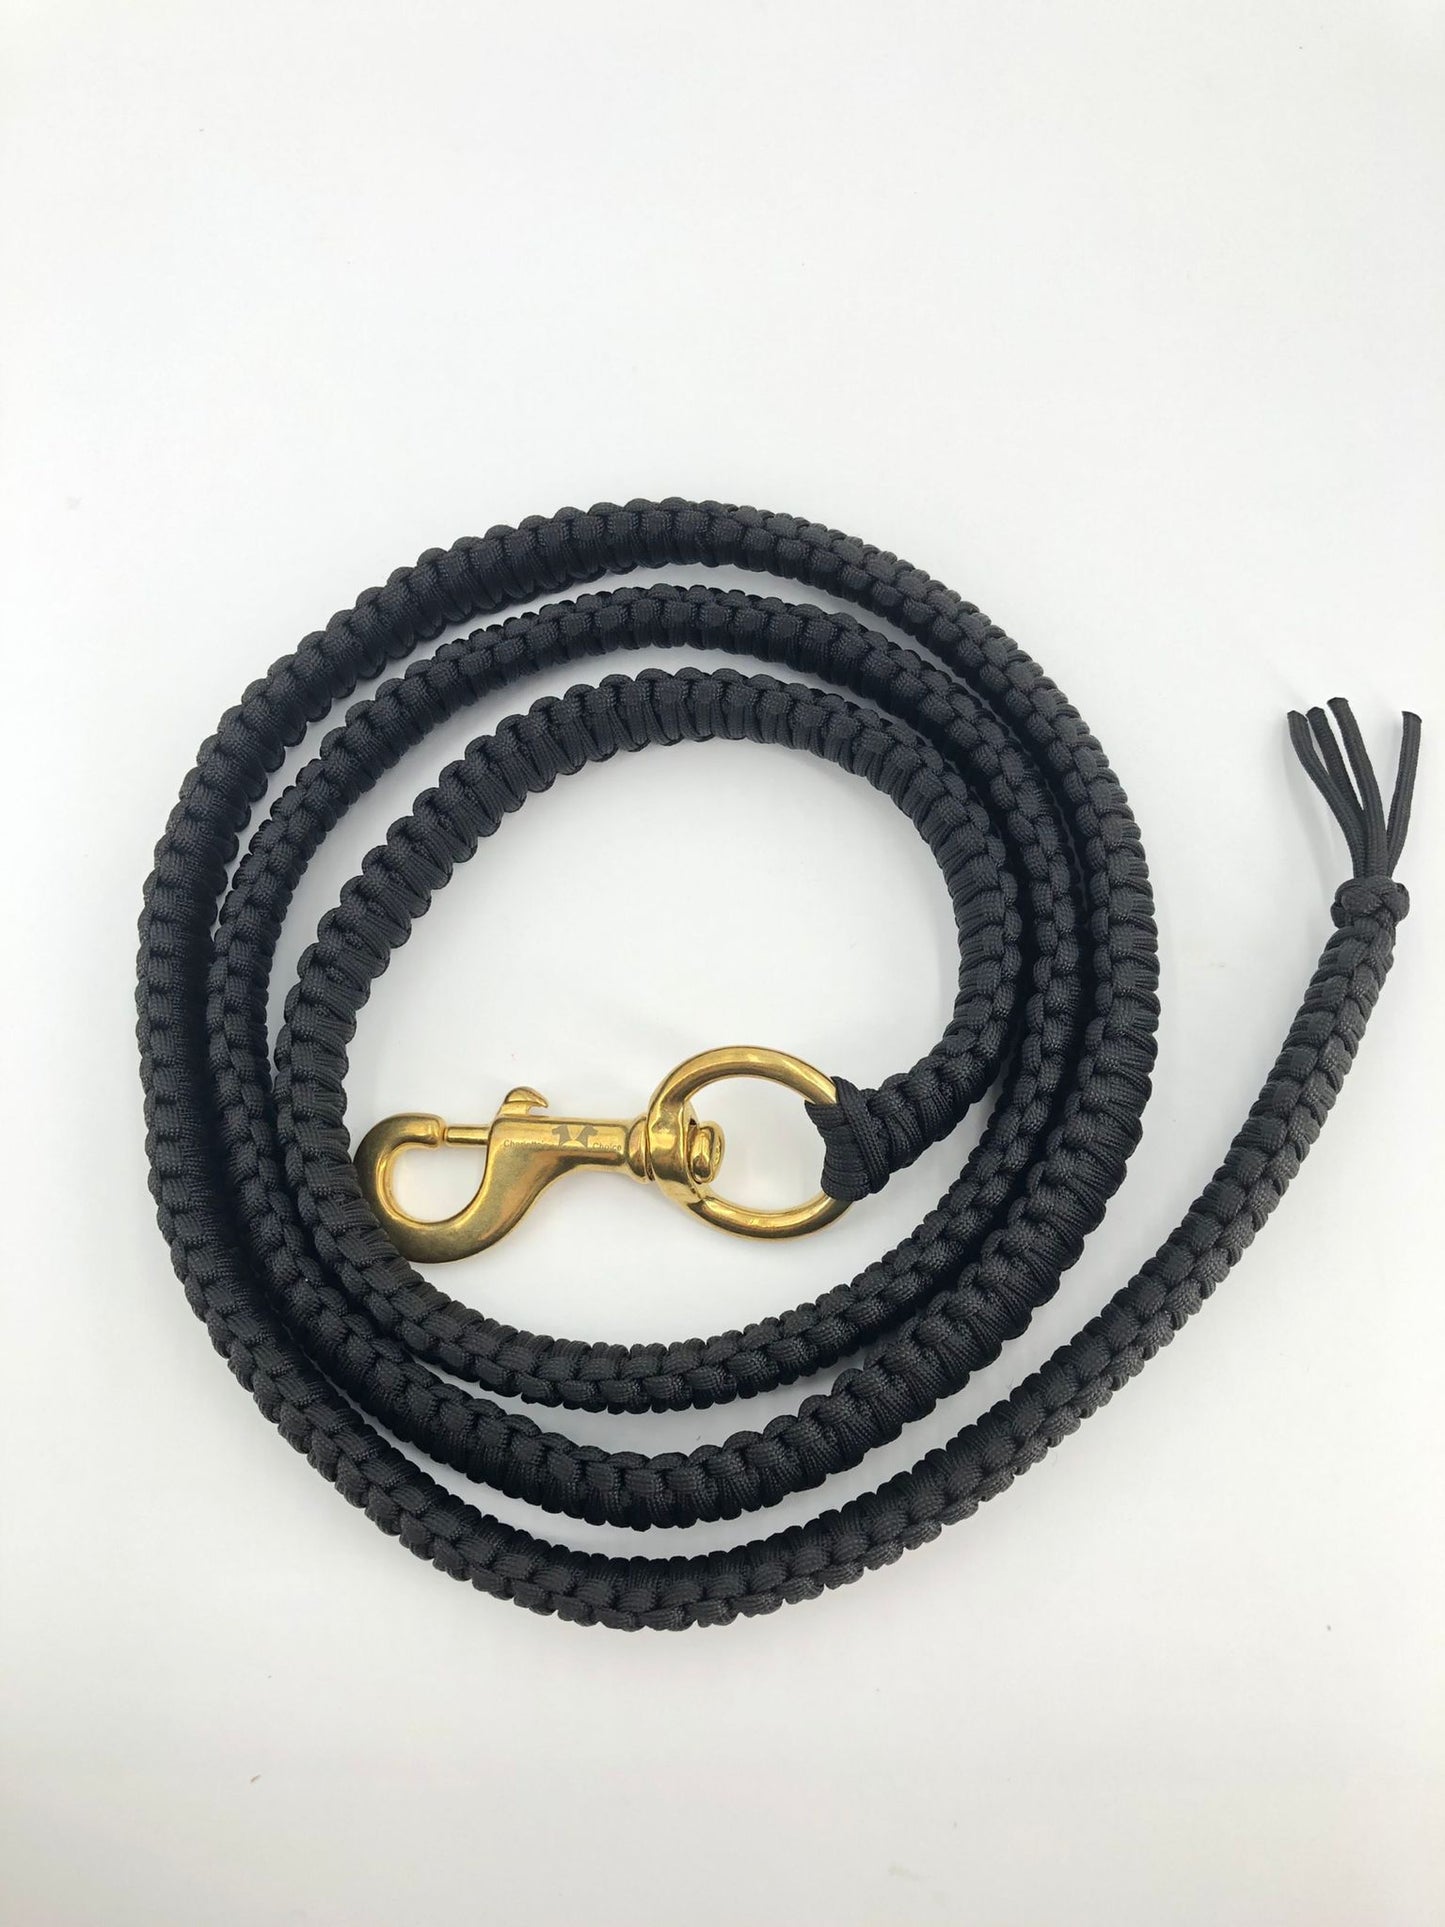 Paracord knotted rope 1,90m